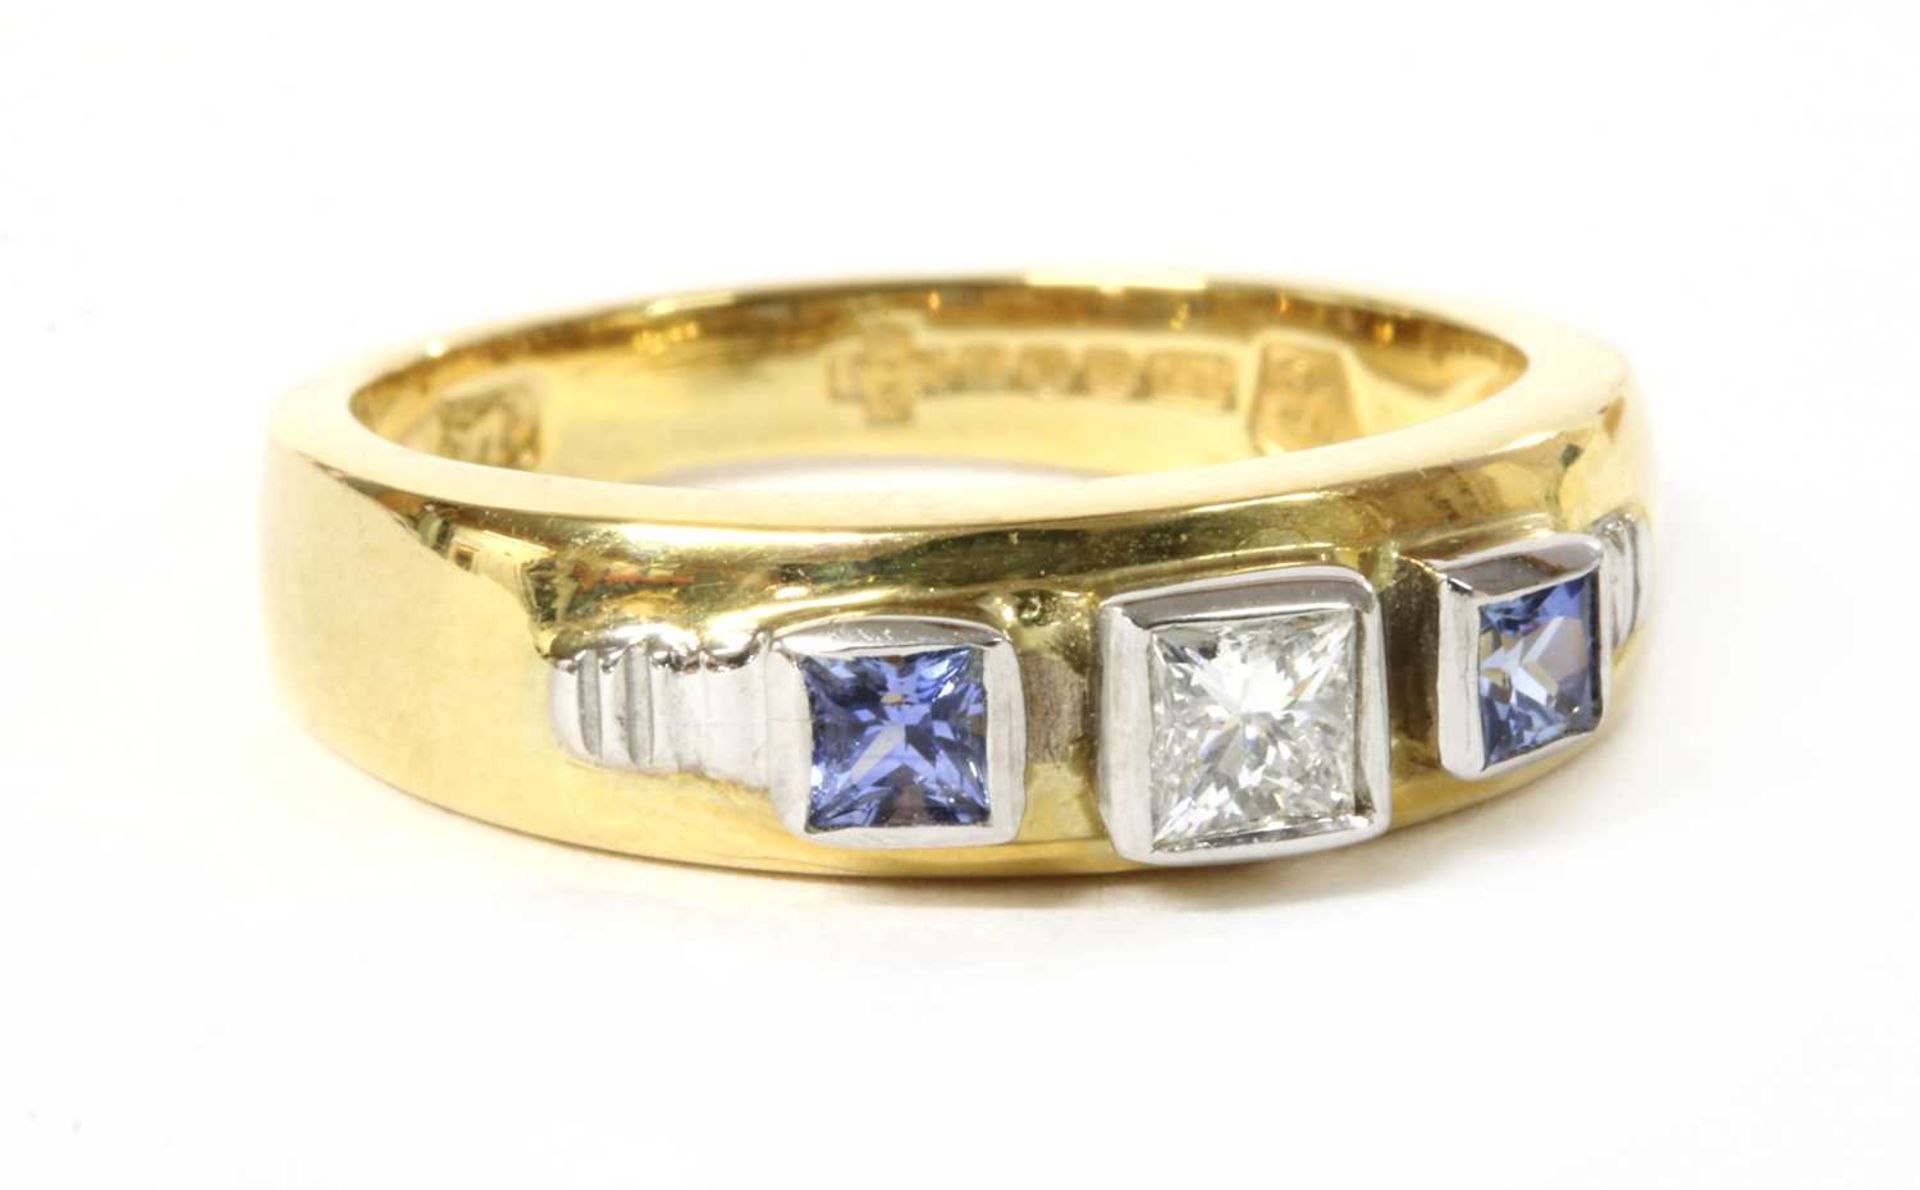 An 18ct gold diamond and tanzanite ring, by Clogau, - Image 2 of 3